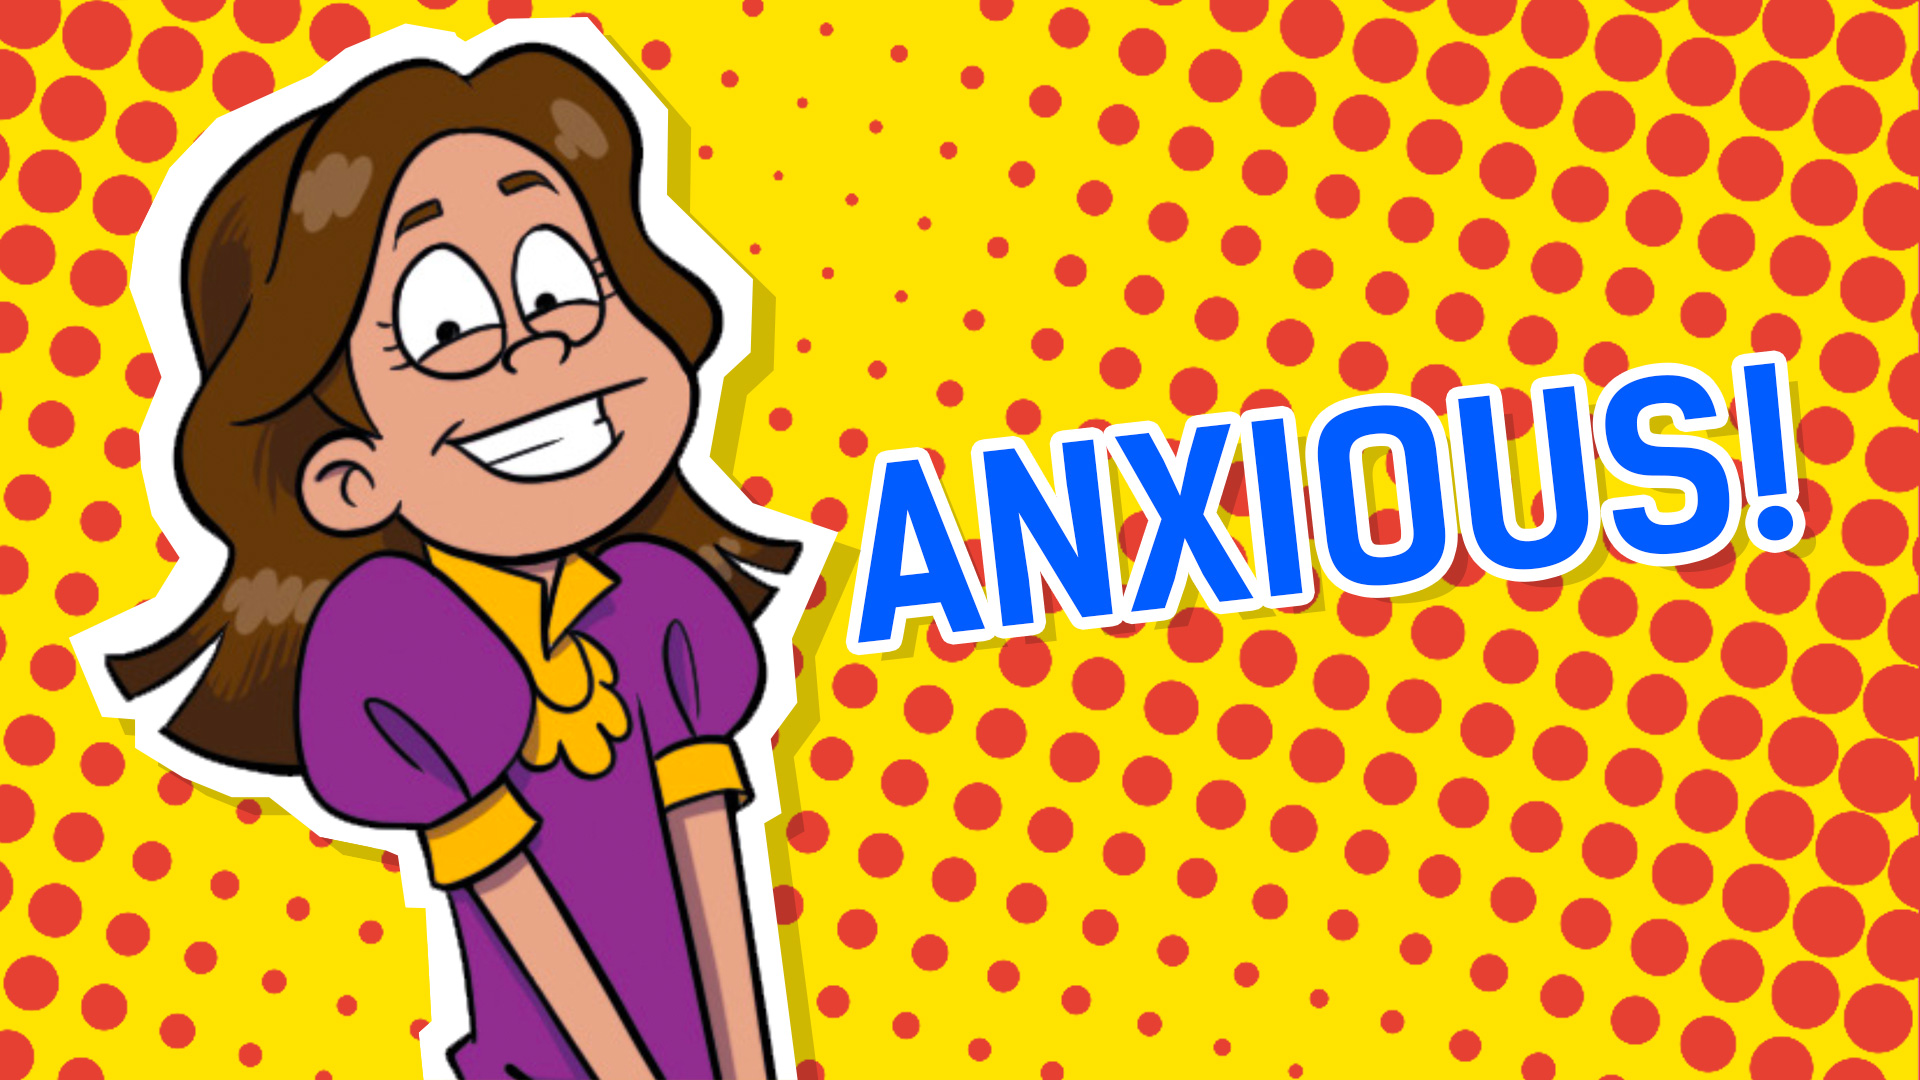 Result: Anxious